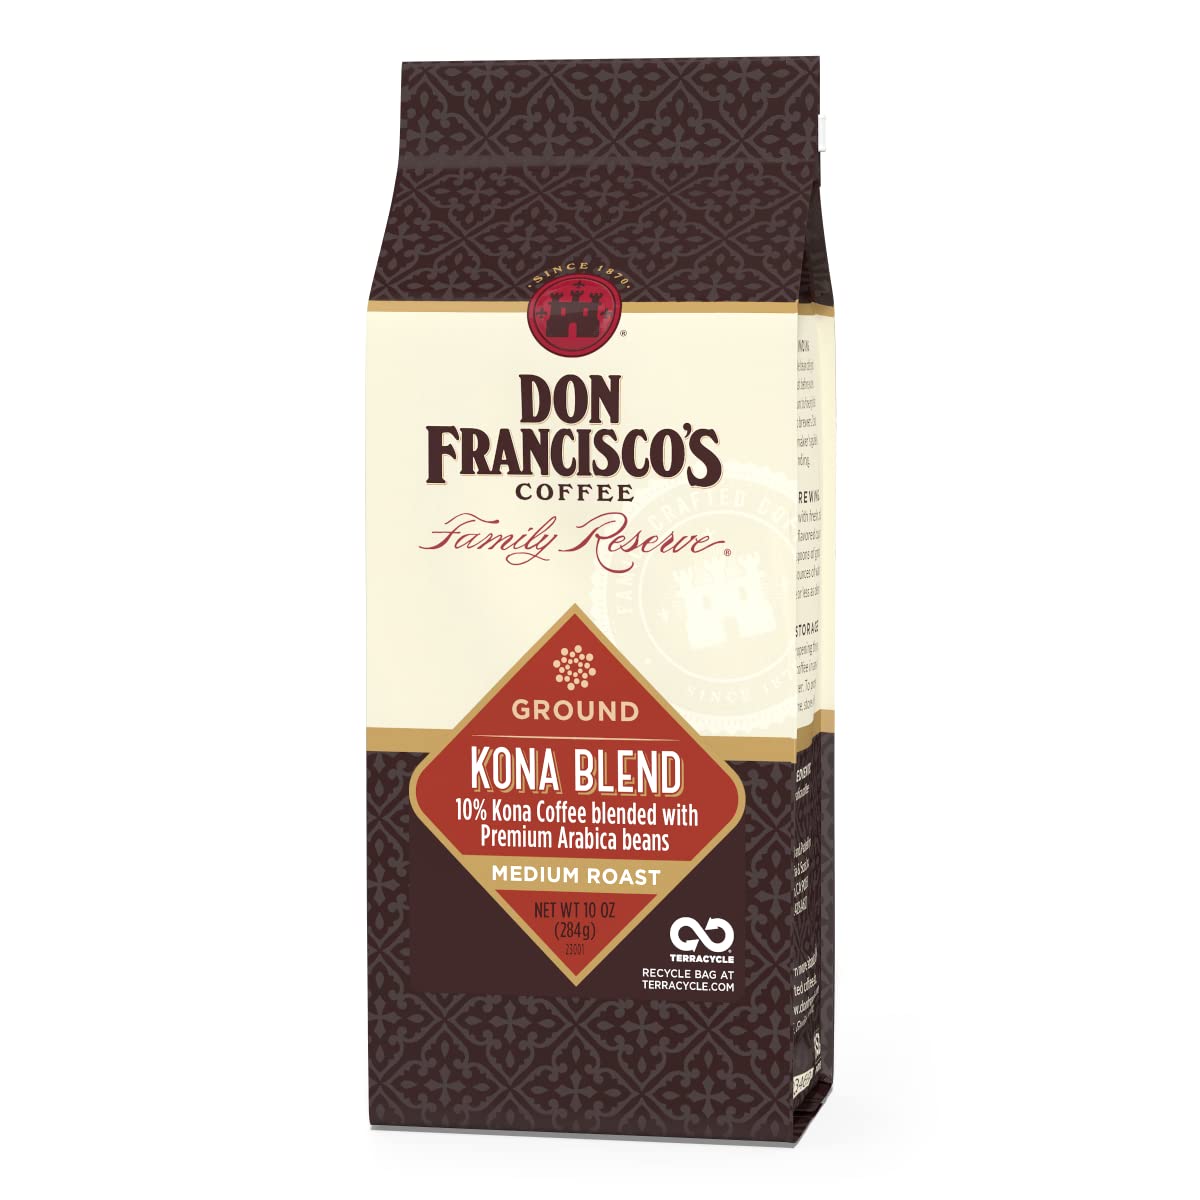 This product is really great. I'm loving the taste, it' smooth and bold, just how I like my coffee. The caramel flavor adds a sweet and delightful twist. Plus, I can tell that it' of good quality, which makes me feel good about what I'm drinking. The freshness also stands out, always leaves my mornings off to a great start. Highly recommended!